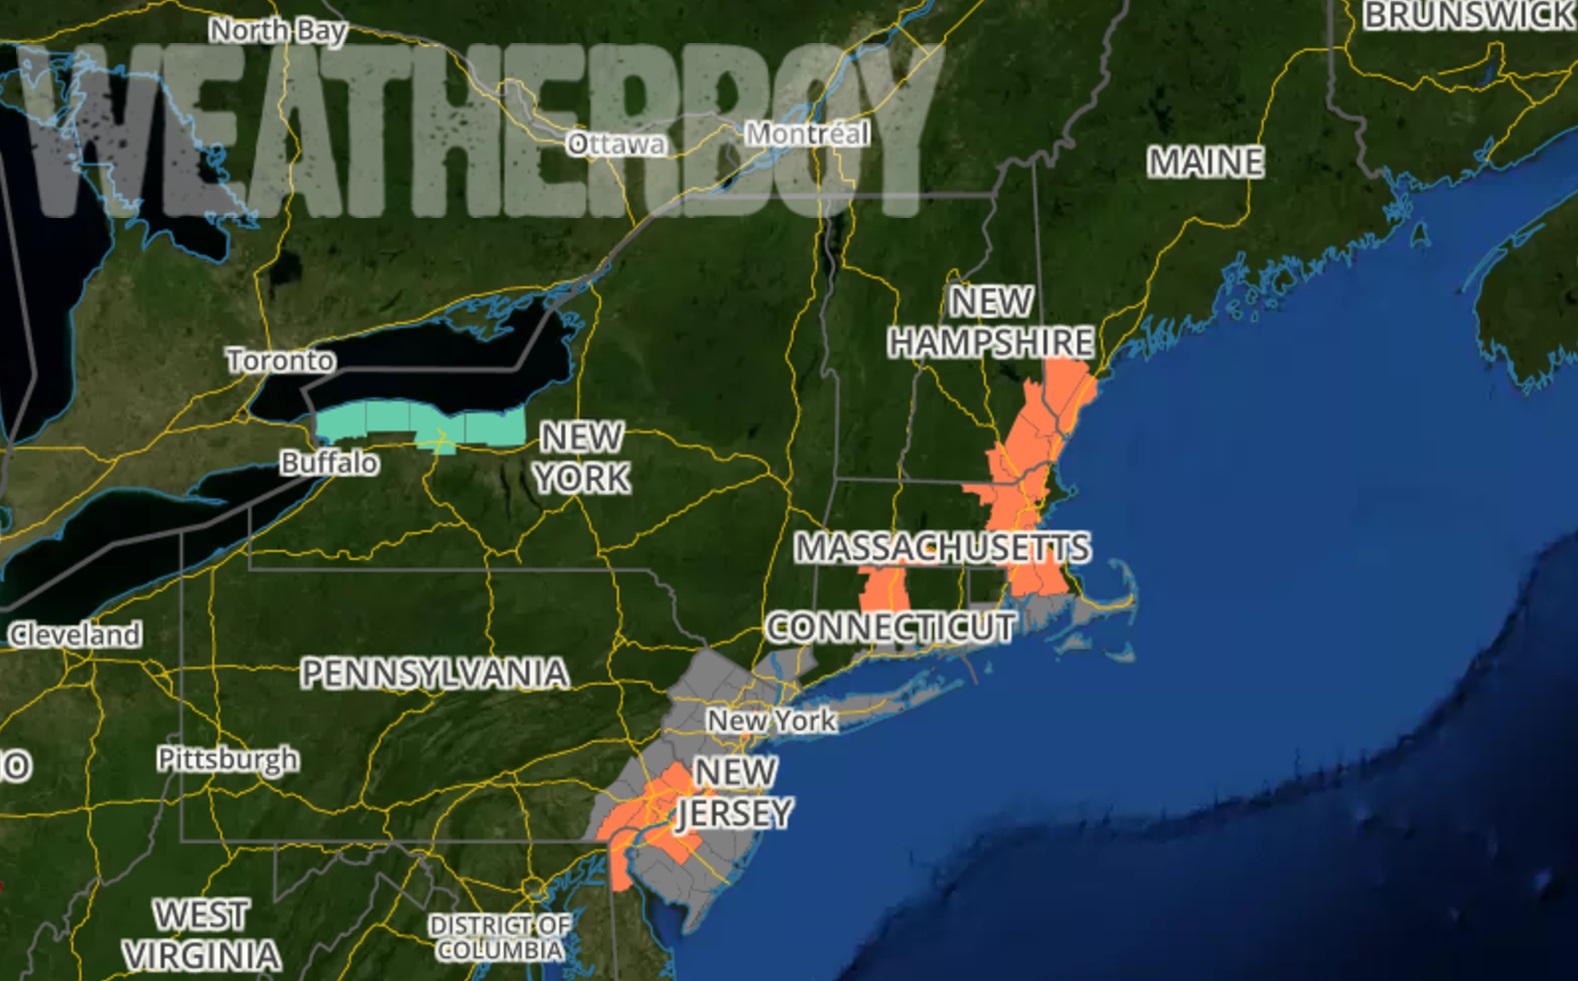 The National Weather Service has issued Heat Advisories (orange) and Air Quality Alerts (gray) in the northeastern US. Map: weatherboy.com